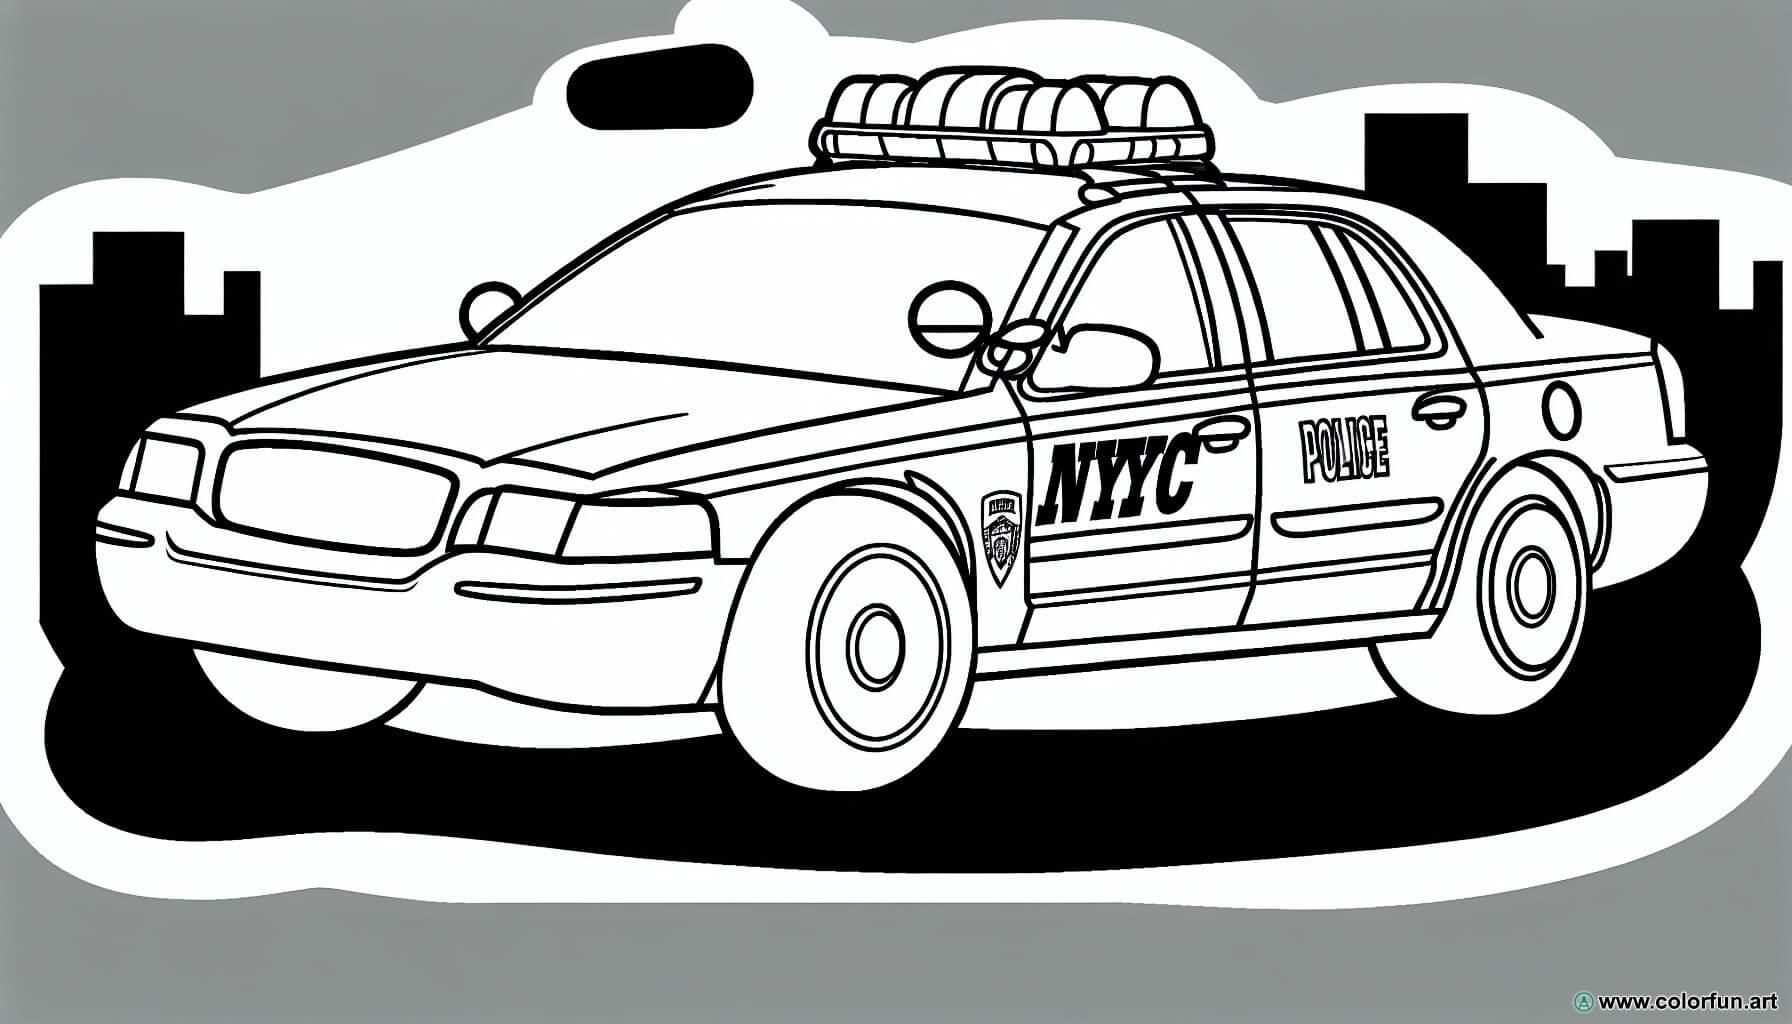 Coloring page police car in new york